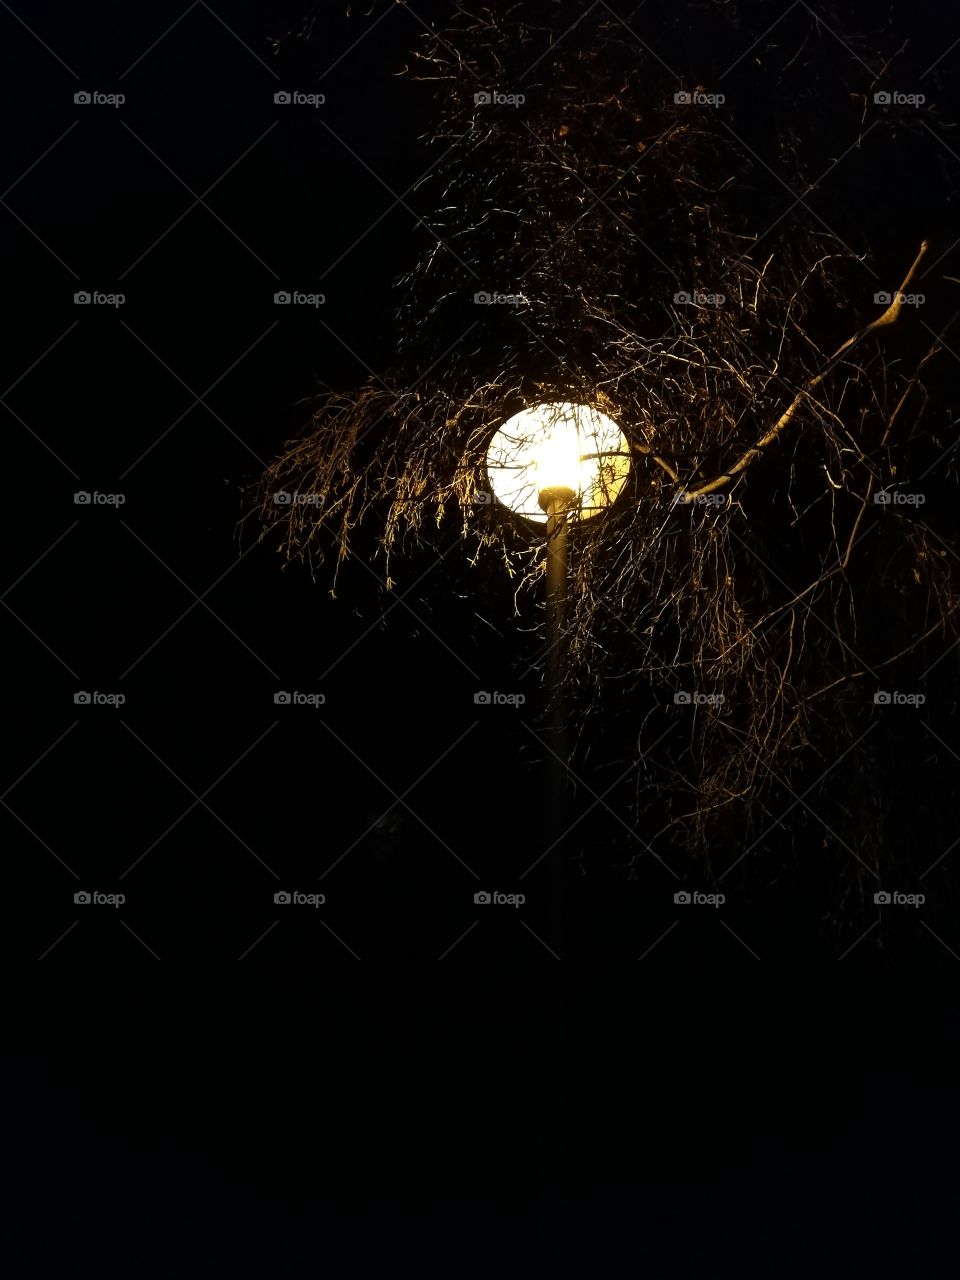 Streetlamp and leafless tree branch at night, eerie picture